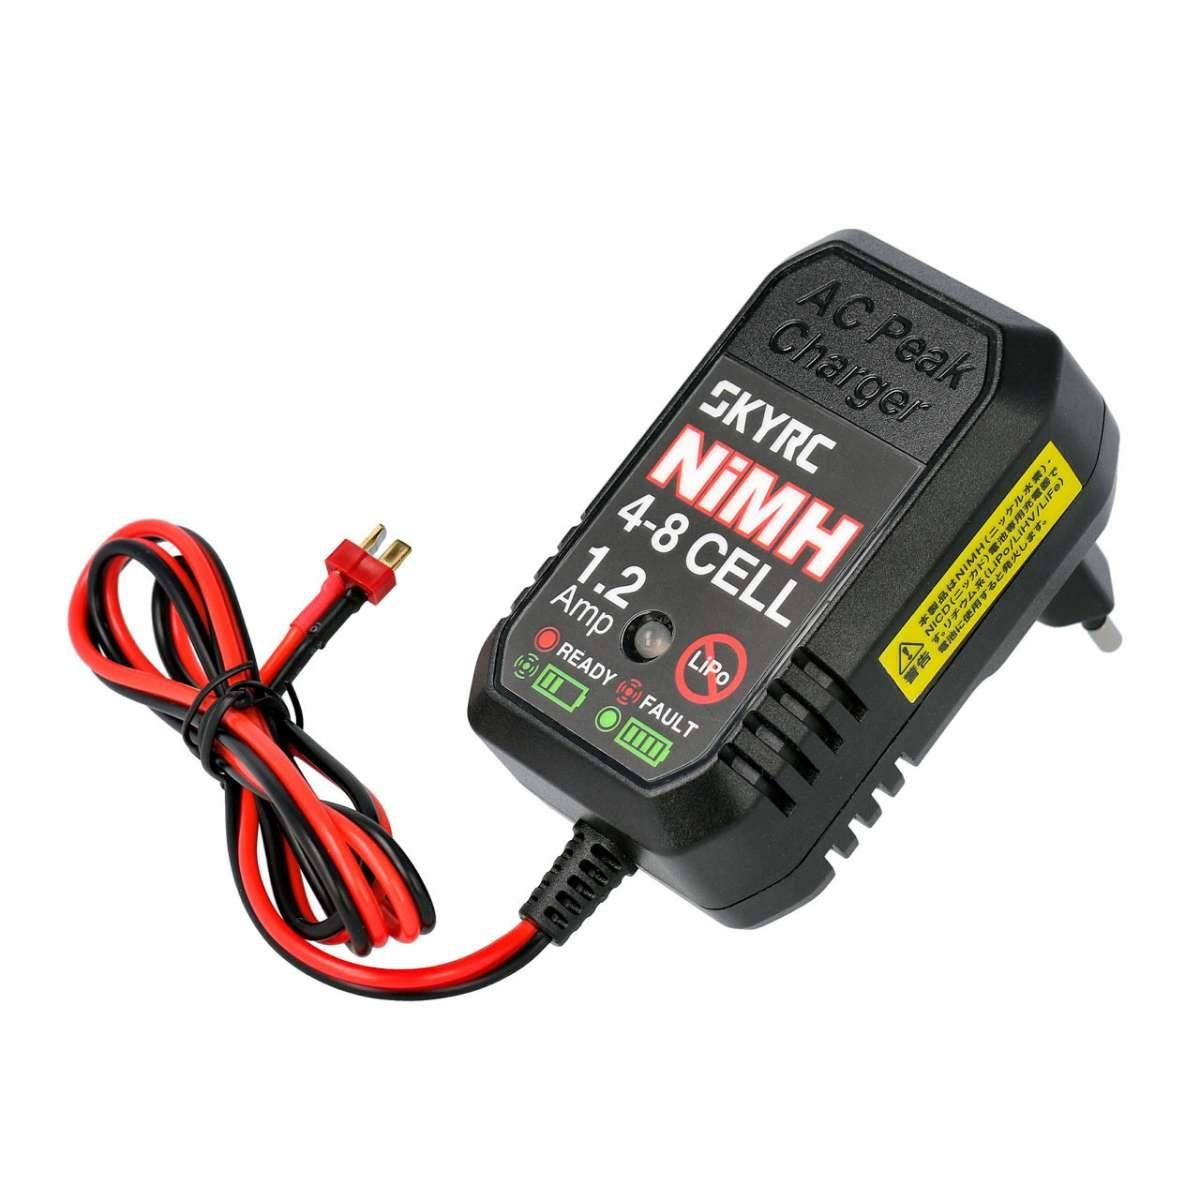 SkyRC eN18 charger with deans 4-8s Nimh Charger 1,2A